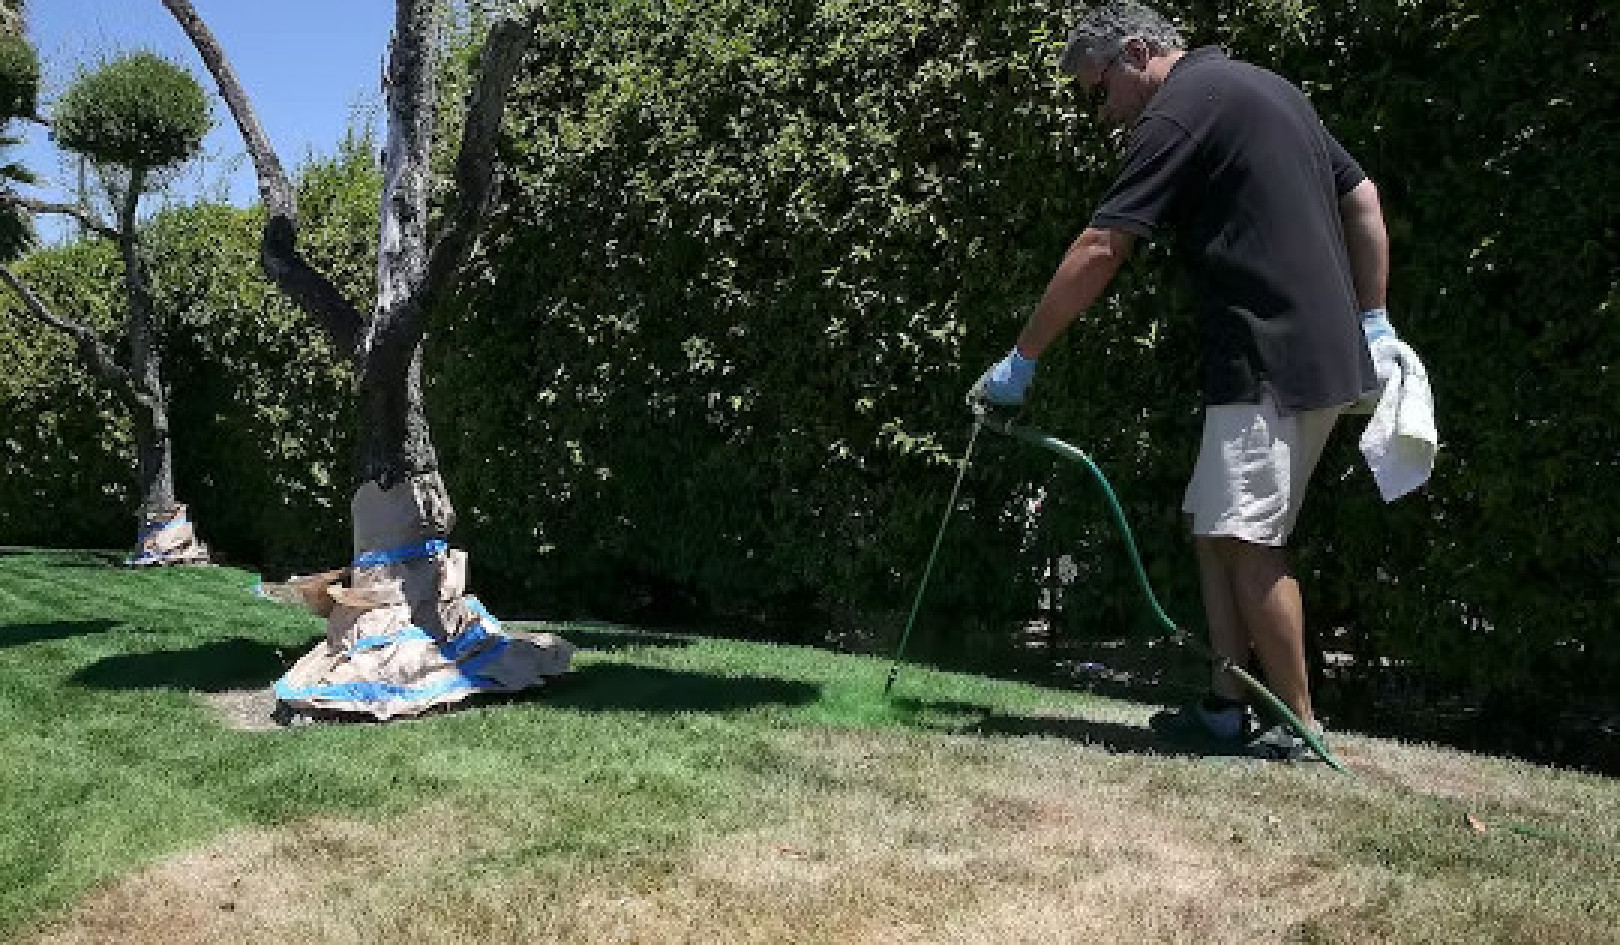 Painting Lawns to Get Them Green?